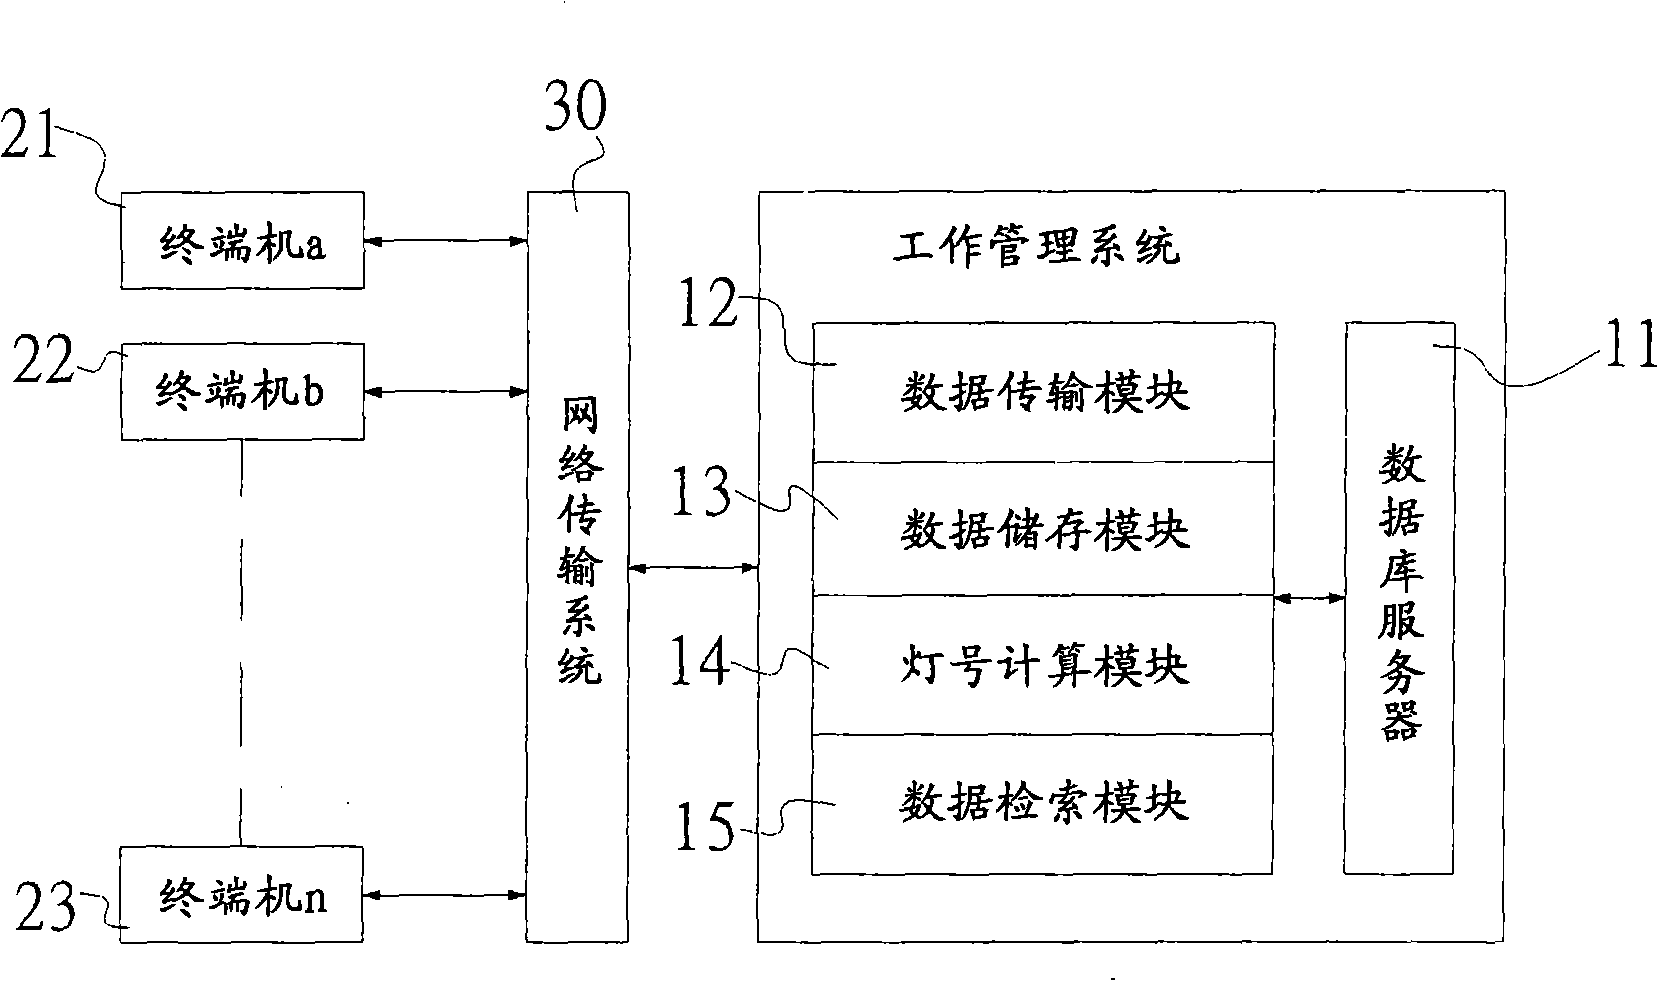 Management system and method using cresset to display working condition